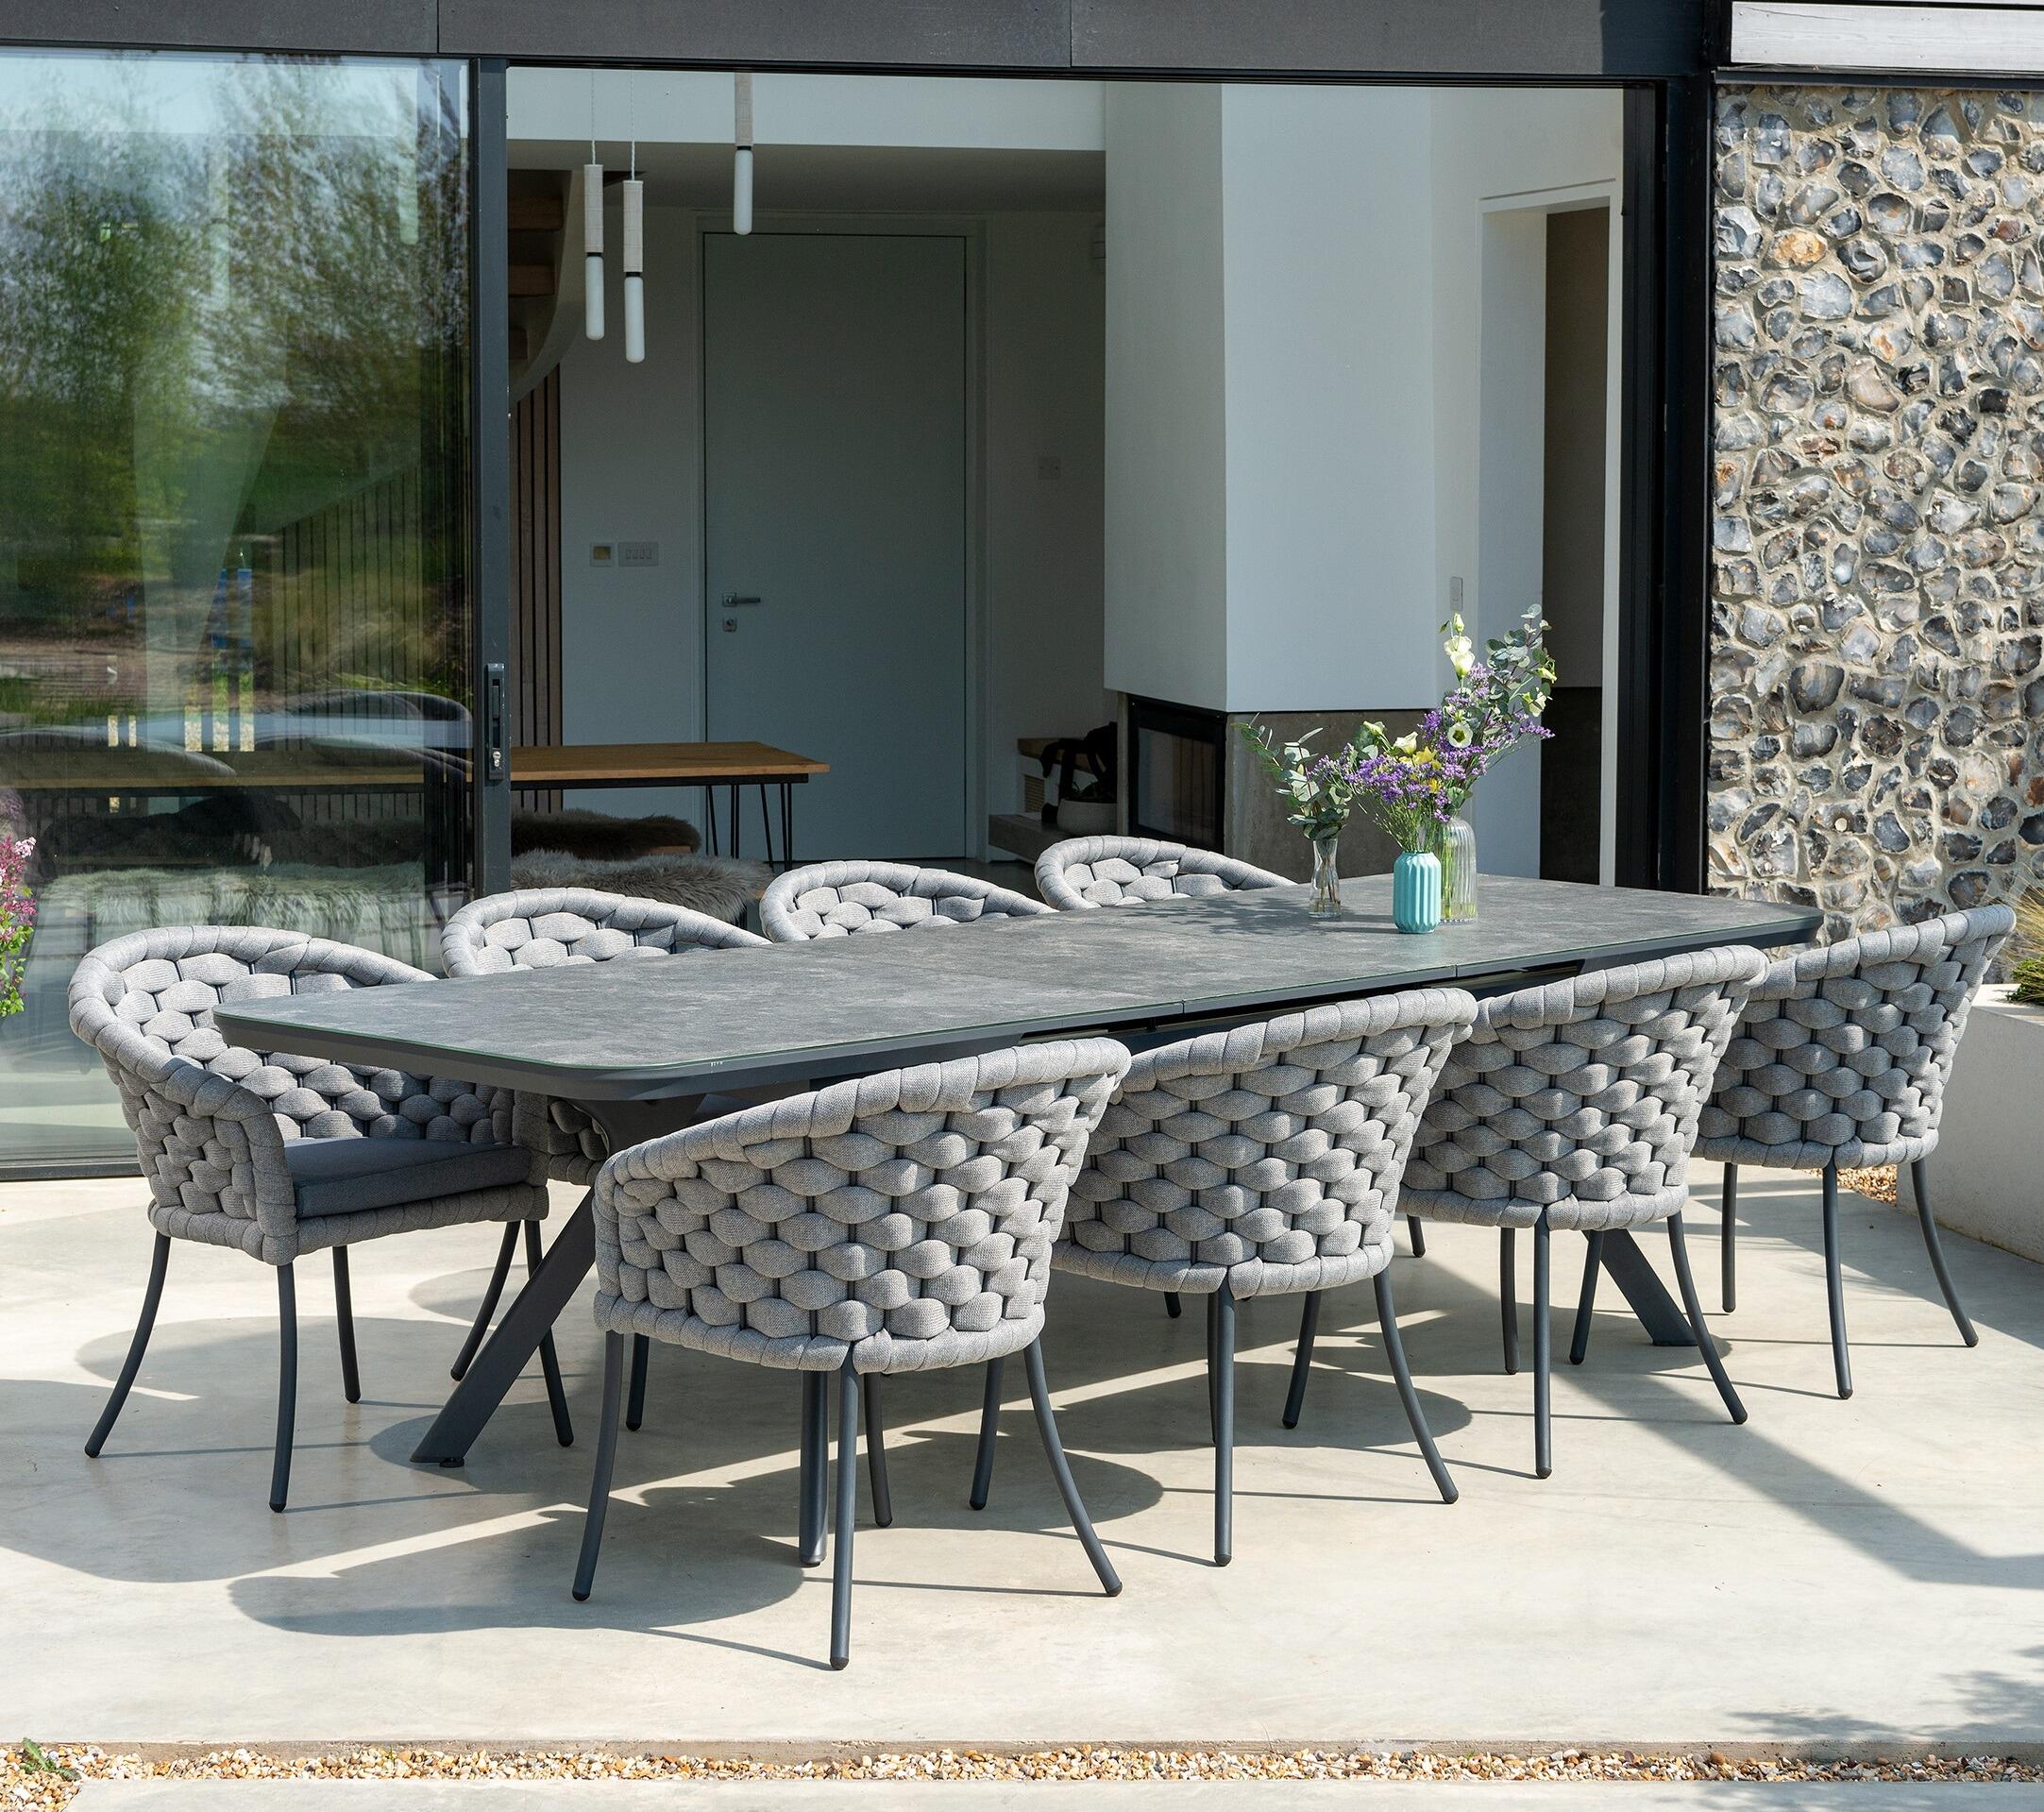 extending table for garden patios use 8 seater wide rope weave garden dining chairs light grey